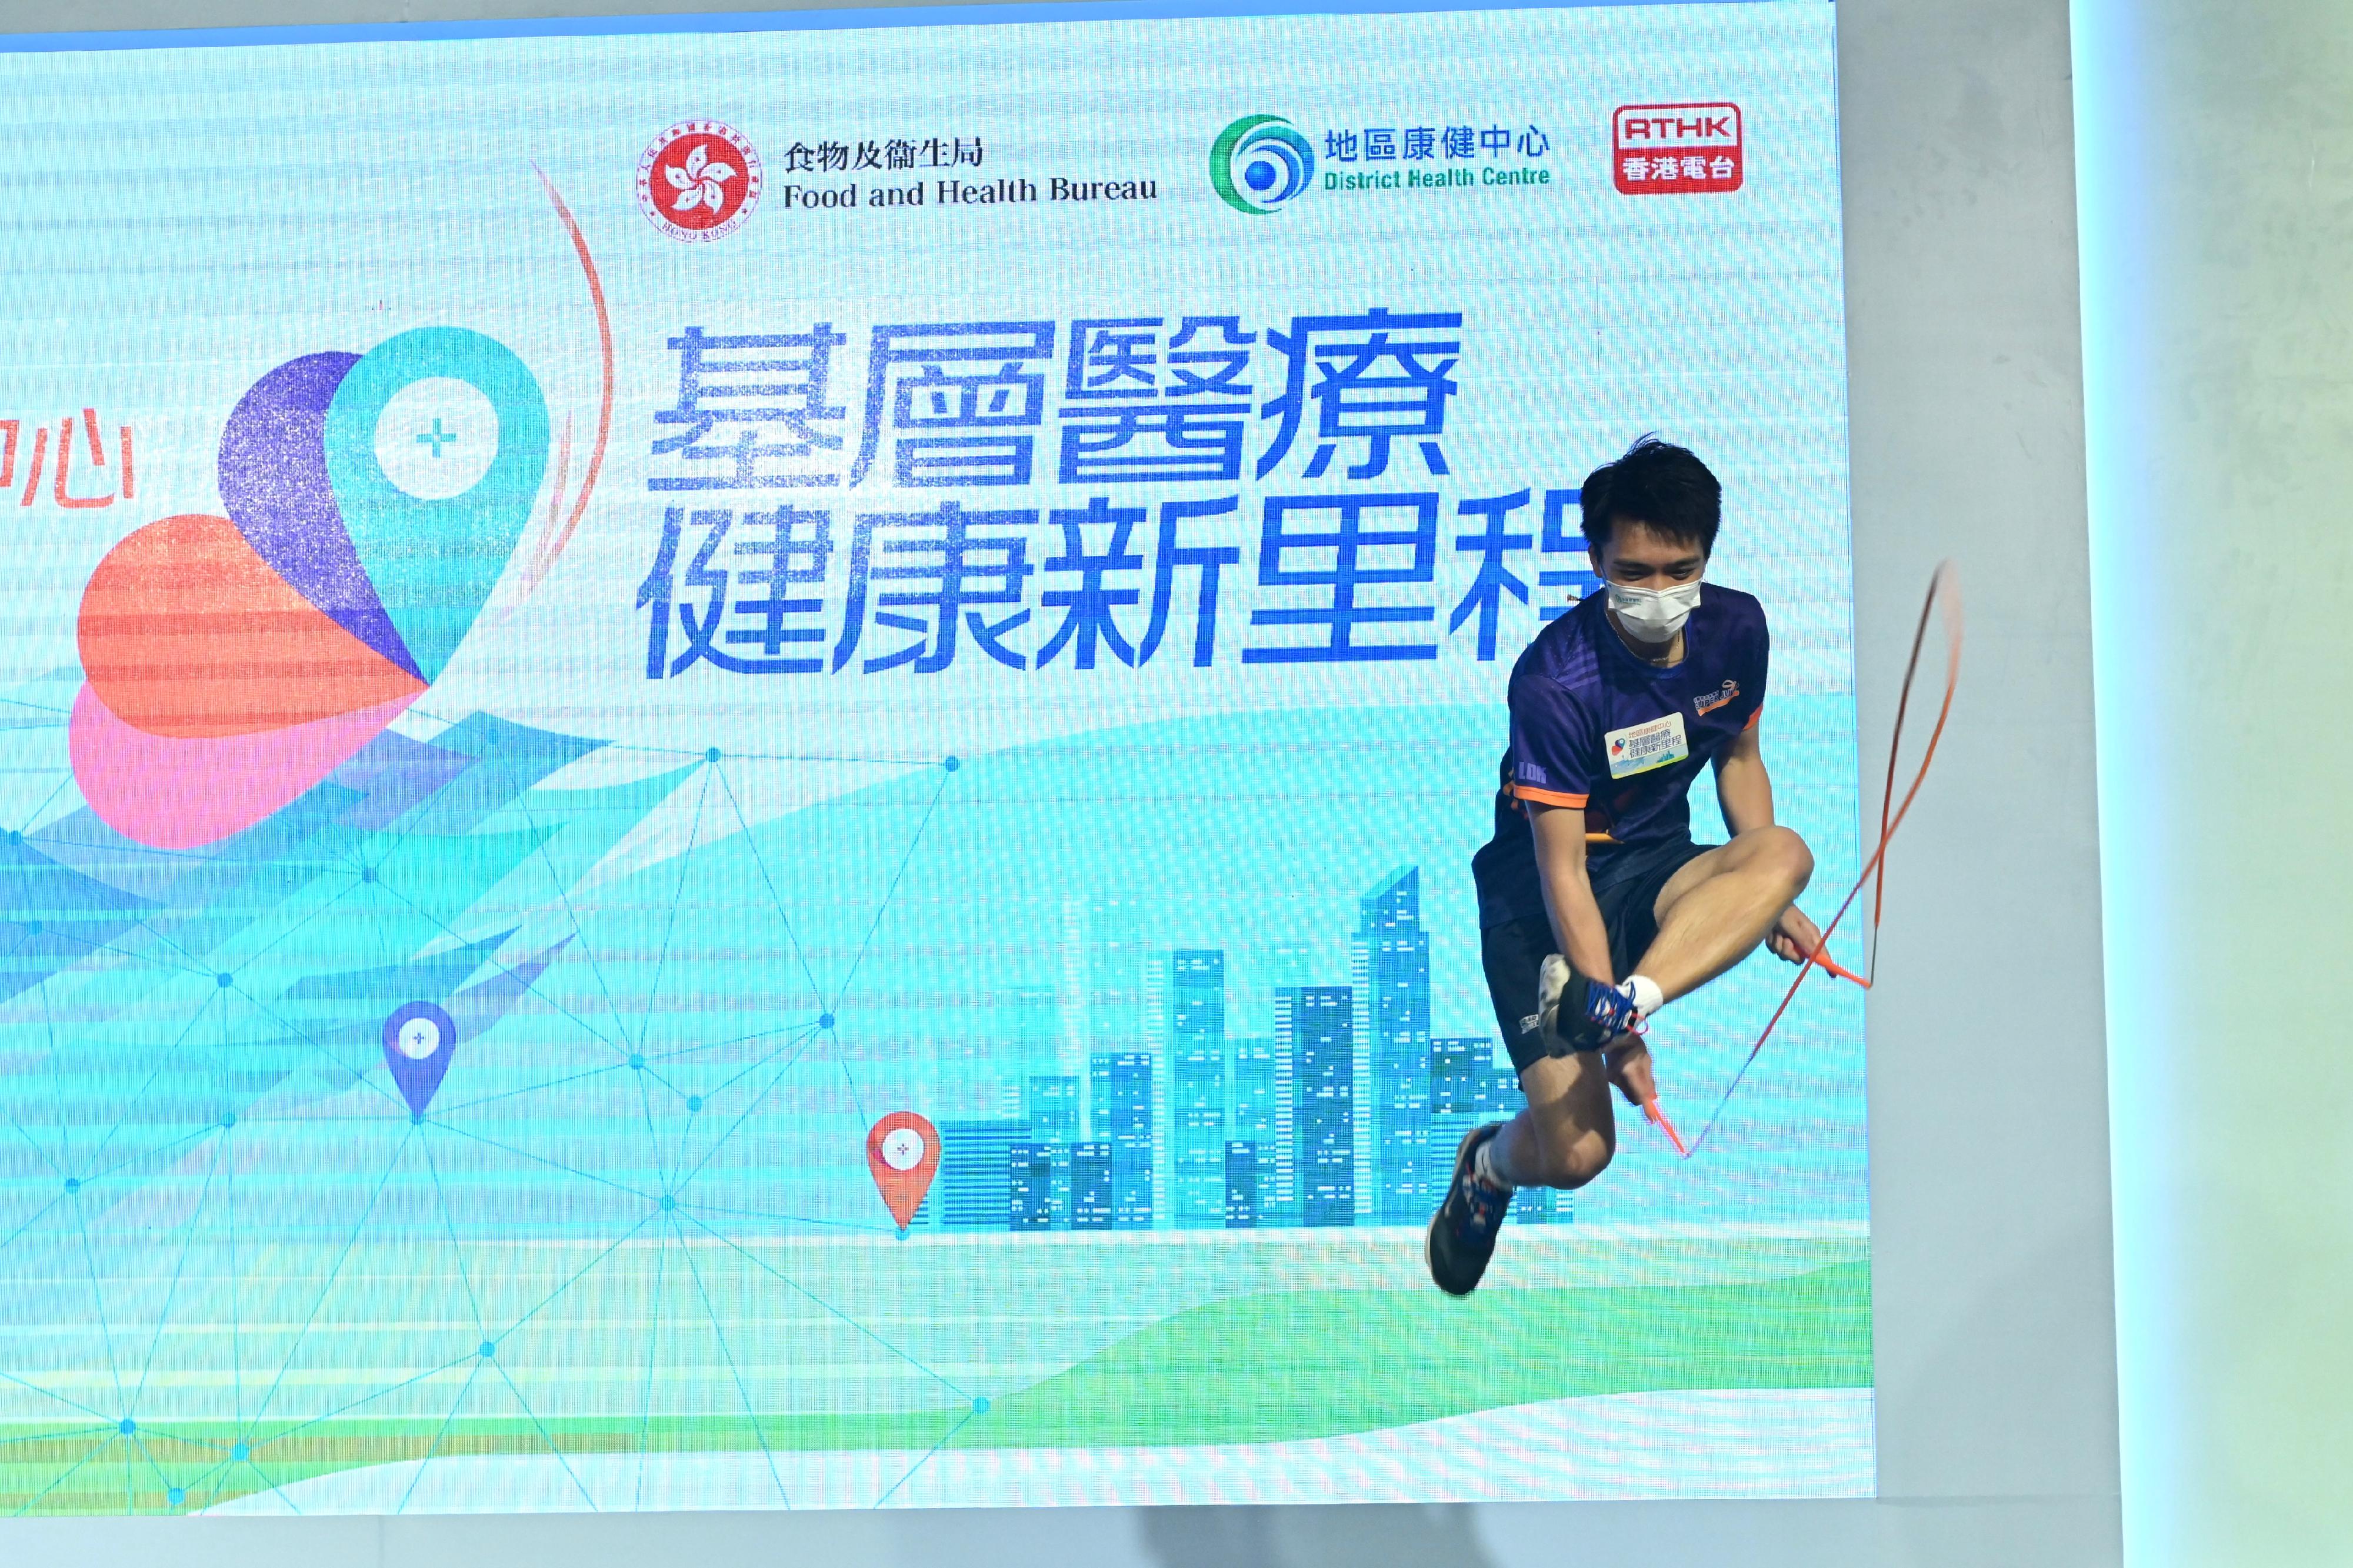 The world champion of individual freestyle rope skipping and a three-time world champion of men’s team rope skipping, Mr Tommy Chow, demonstrates freestyle rope skipping at the “District Health Centre – New Journey in Primary Healthcare” Ceremony today (June 15). 